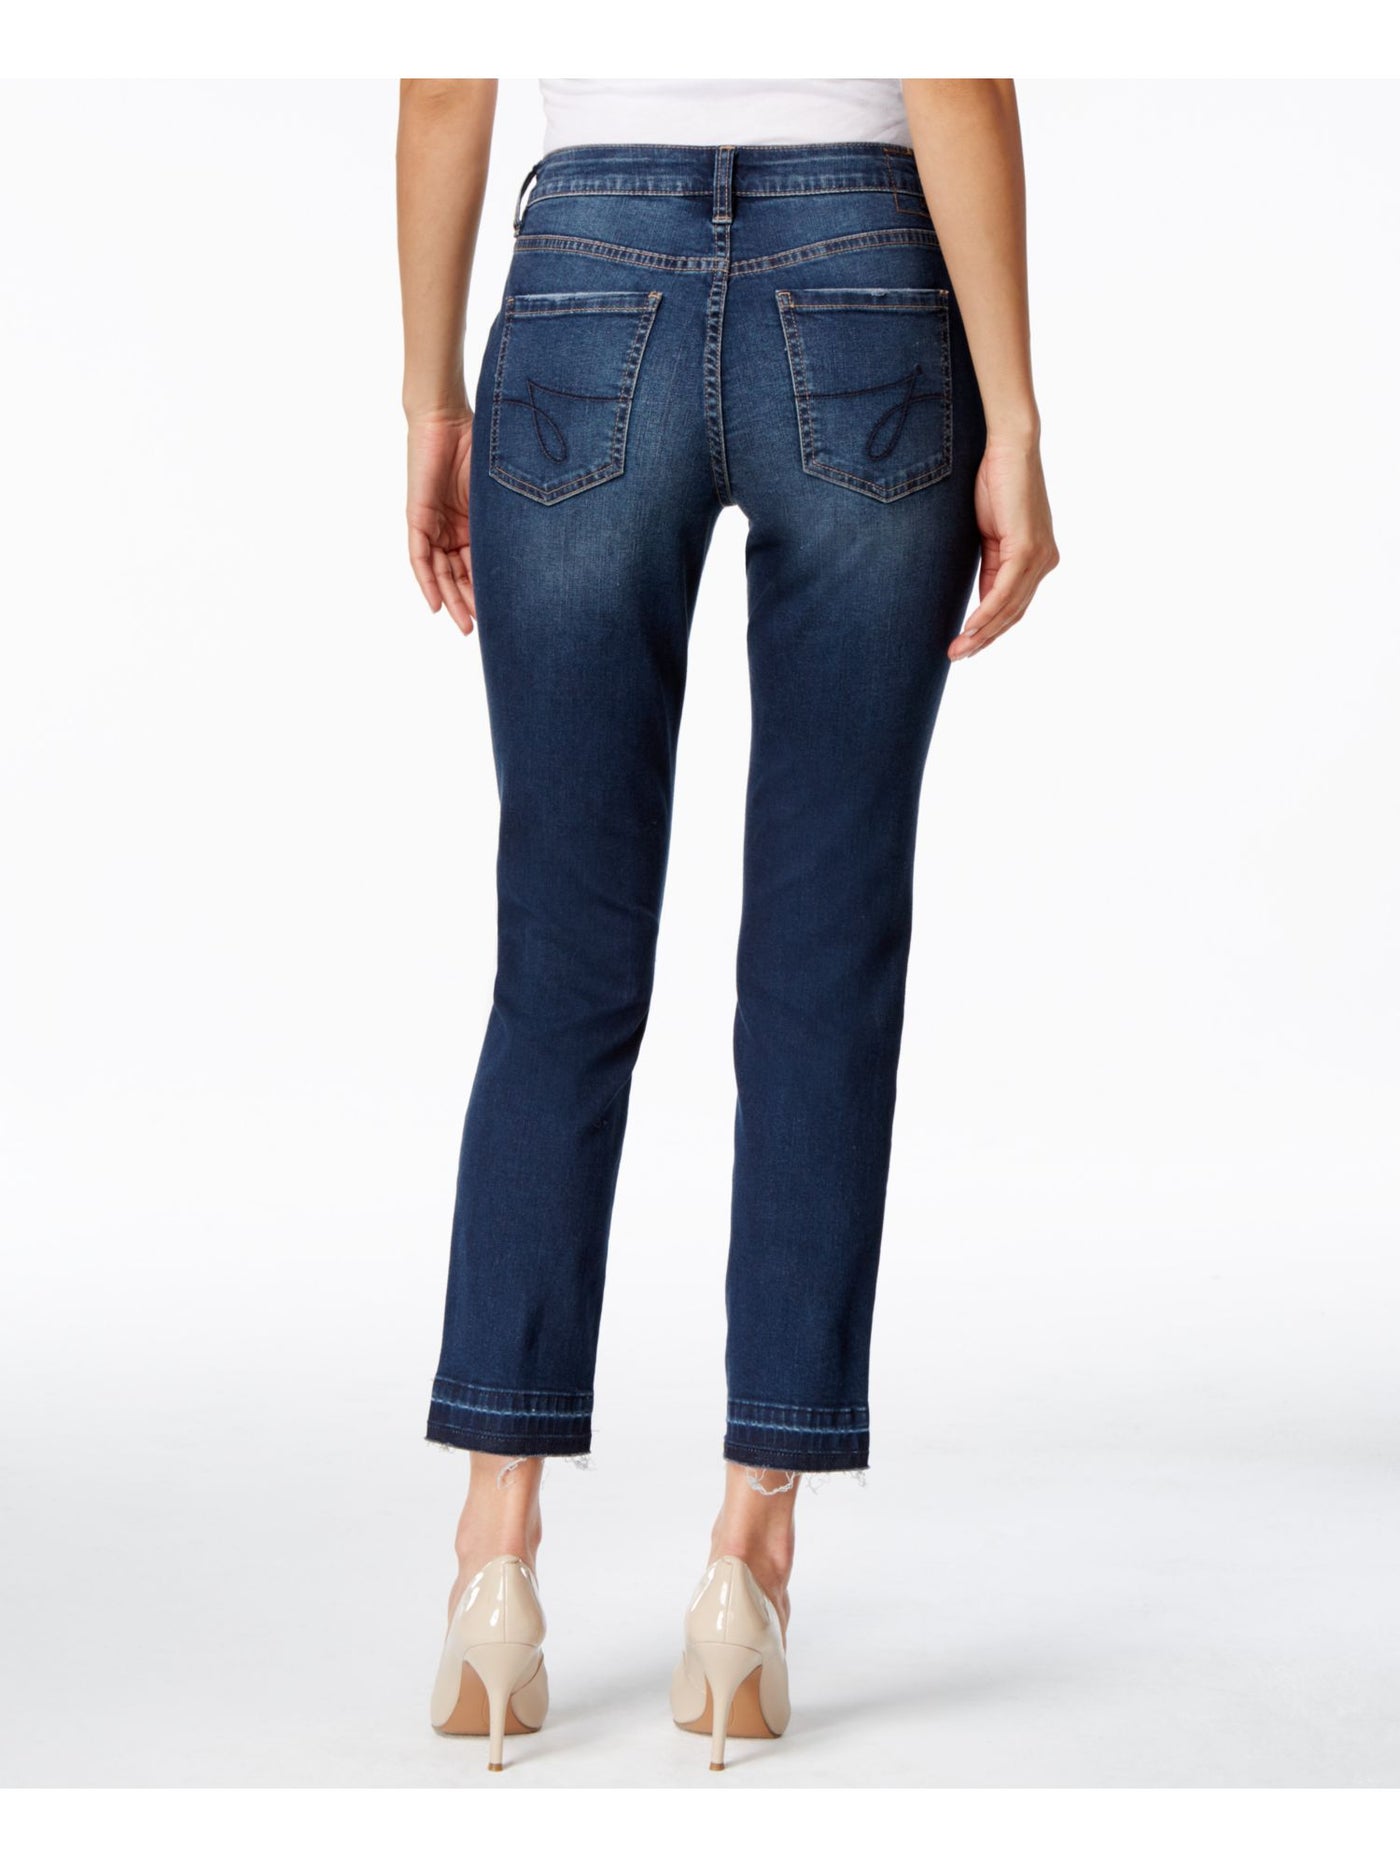 JAG Womens Blue Cuffed Jeans Size: S